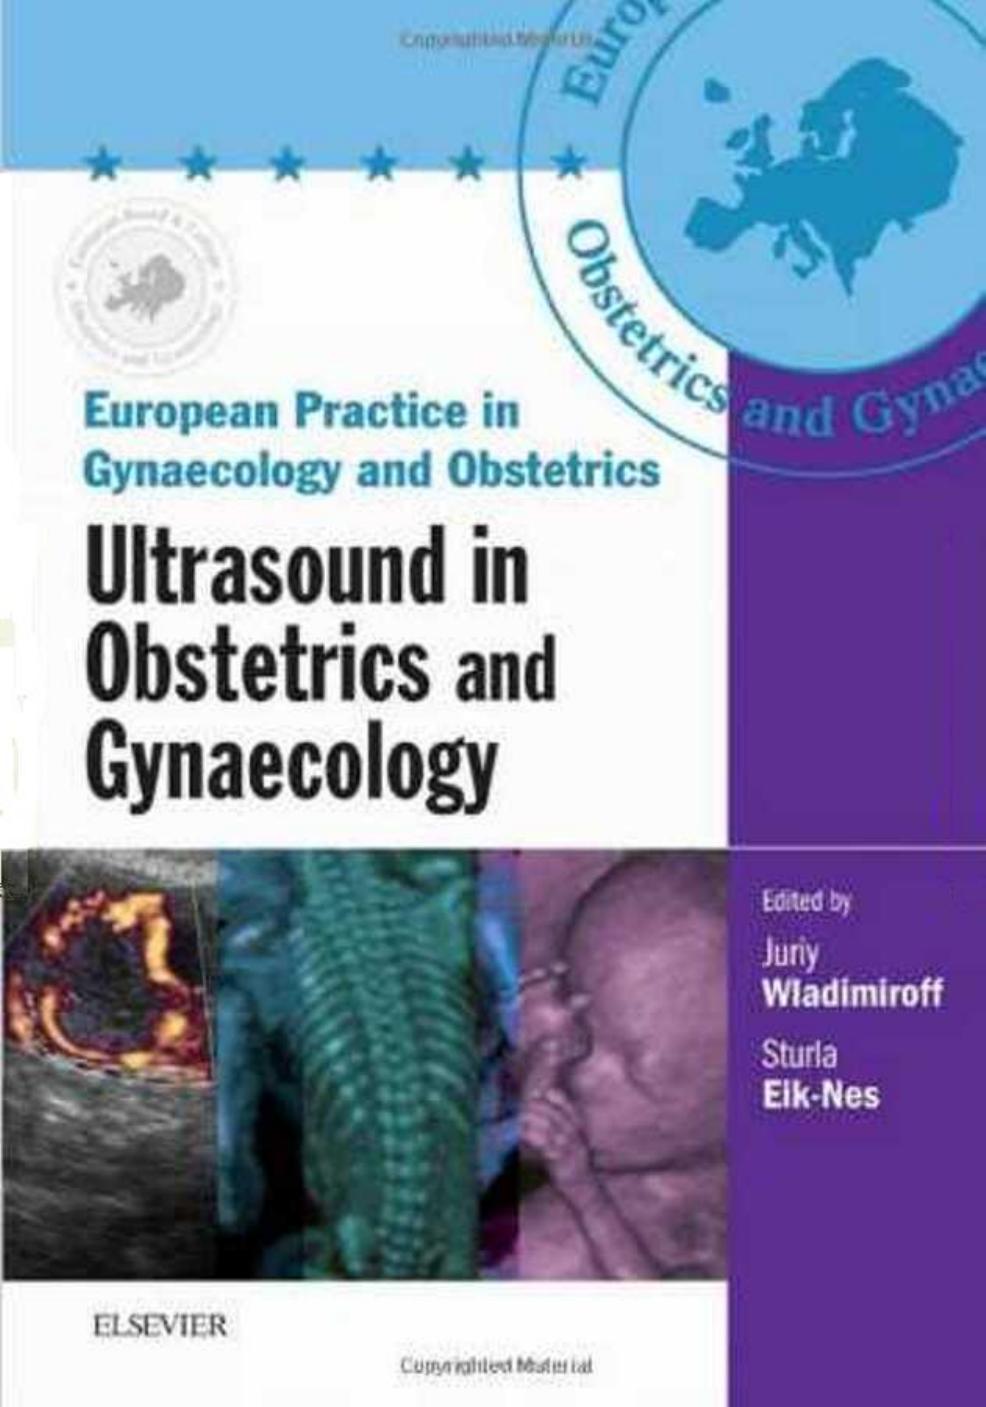 Ultrasound in Obstetrics and Gynaecology  European Practice in Gynaecology and Obstetrics Series 2009 ( PDFDrive.com )